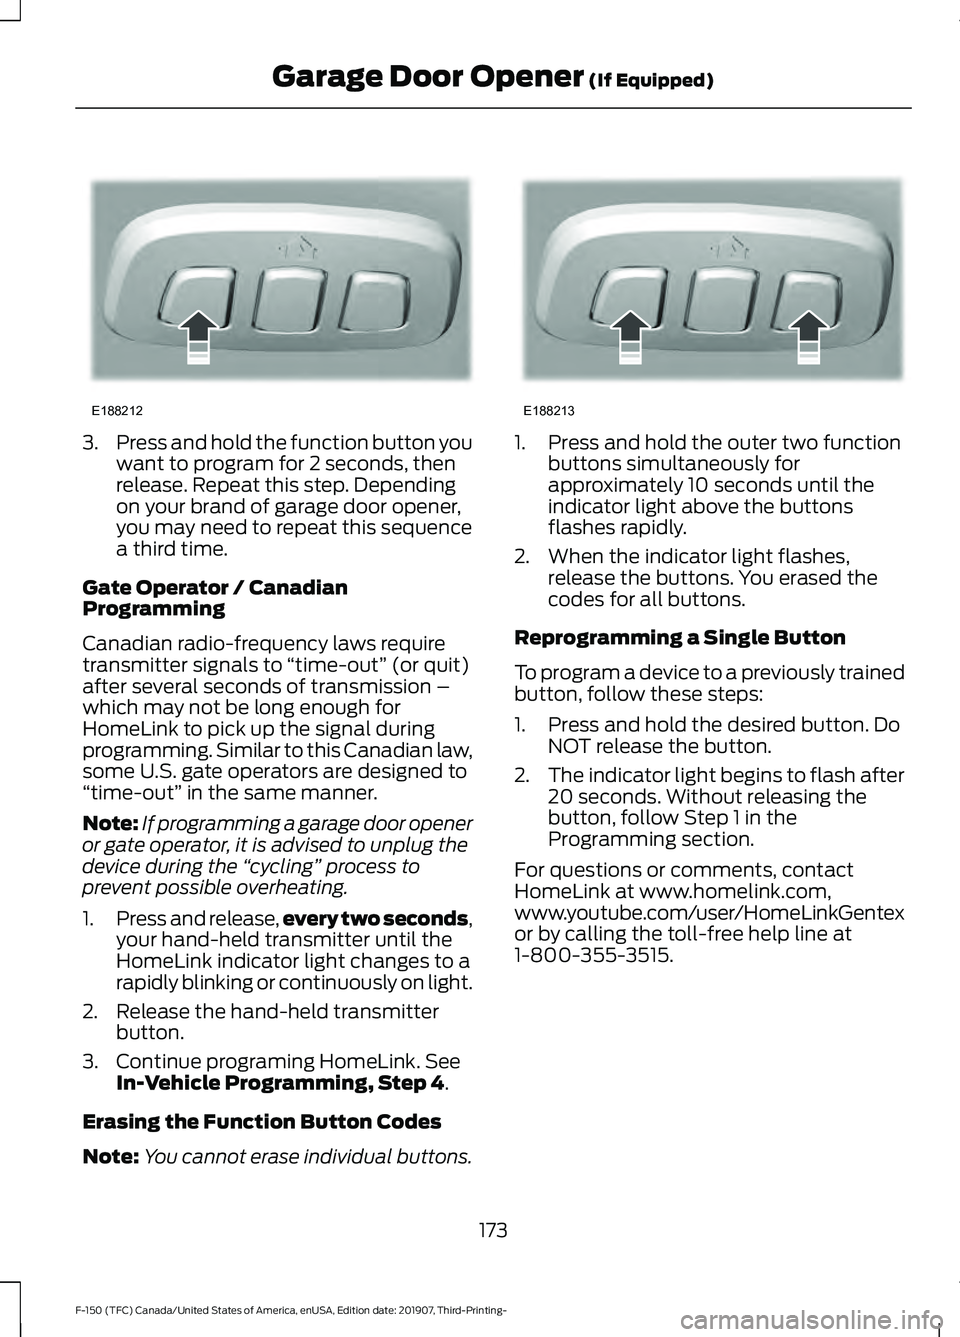 FORD F-150 2020  Owners Manual 3.
Press and hold the function button you
want to program for 2 seconds, then
release. Repeat this step. Depending
on your brand of garage door opener,
you may need to repeat this sequence
a third tim